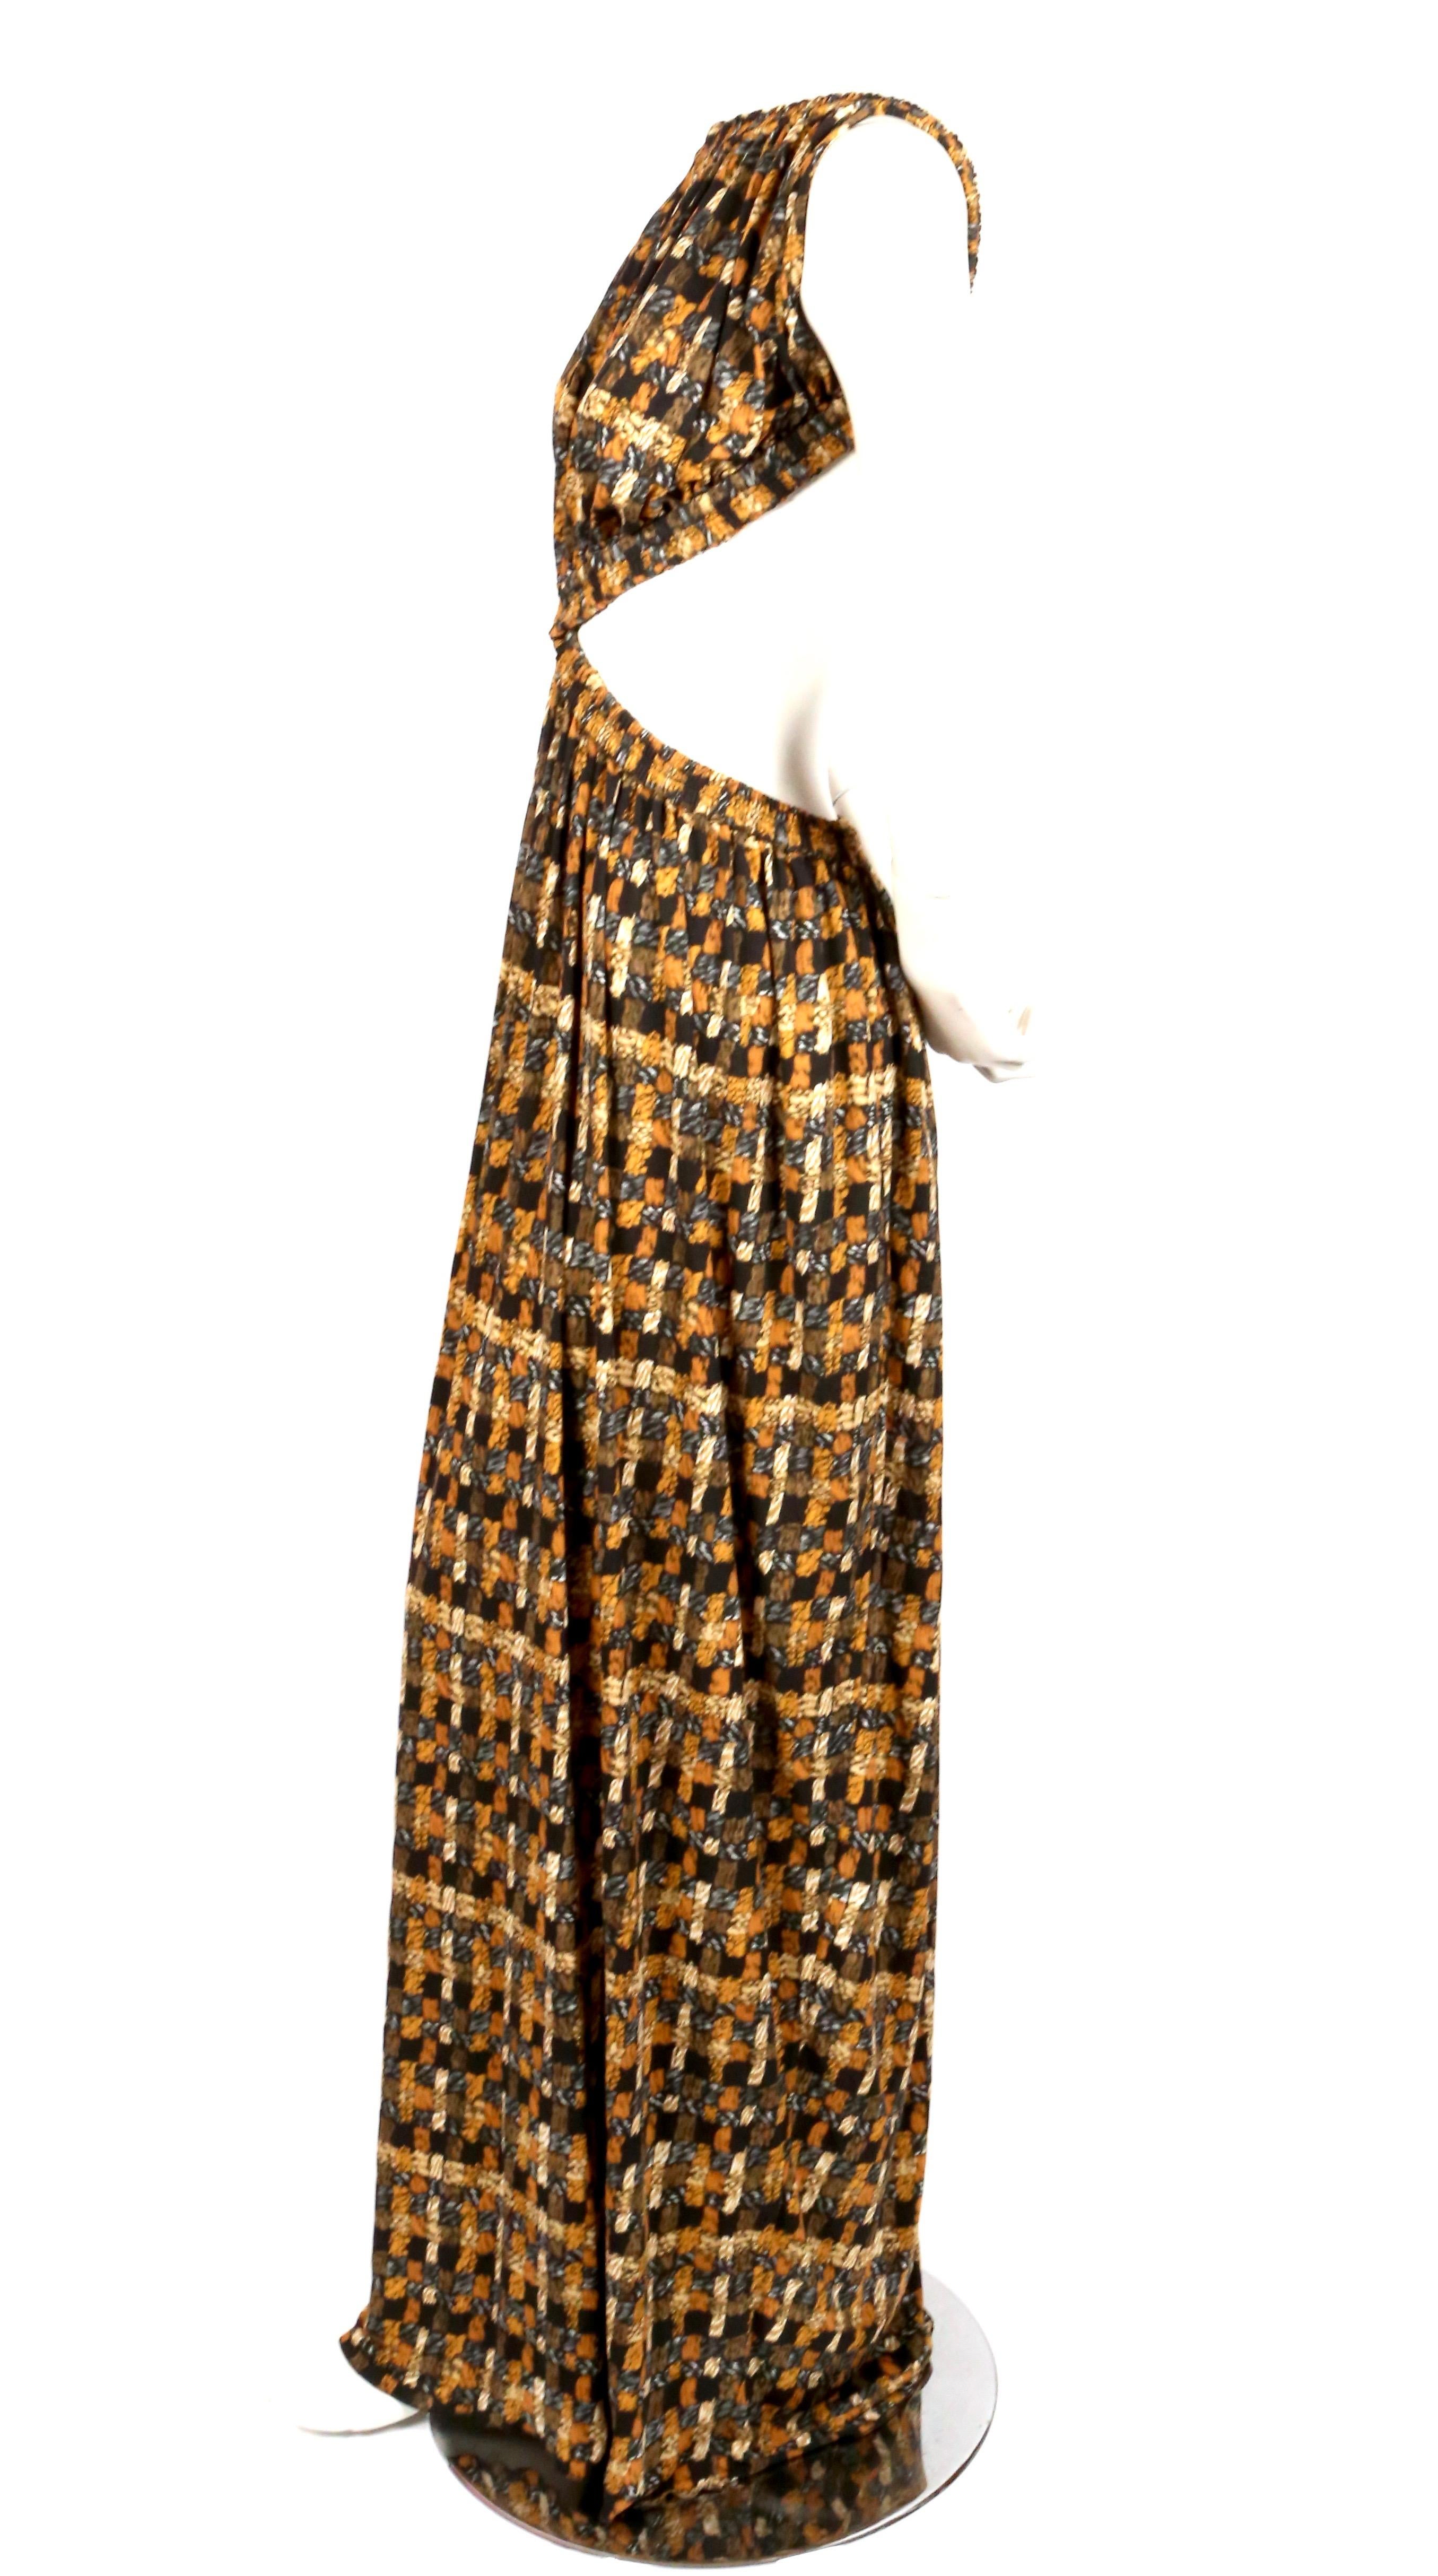 2017 CELINE by PHOEBE PHILO basket woven print runway dress with cutouts In New Condition In San Fransisco, CA